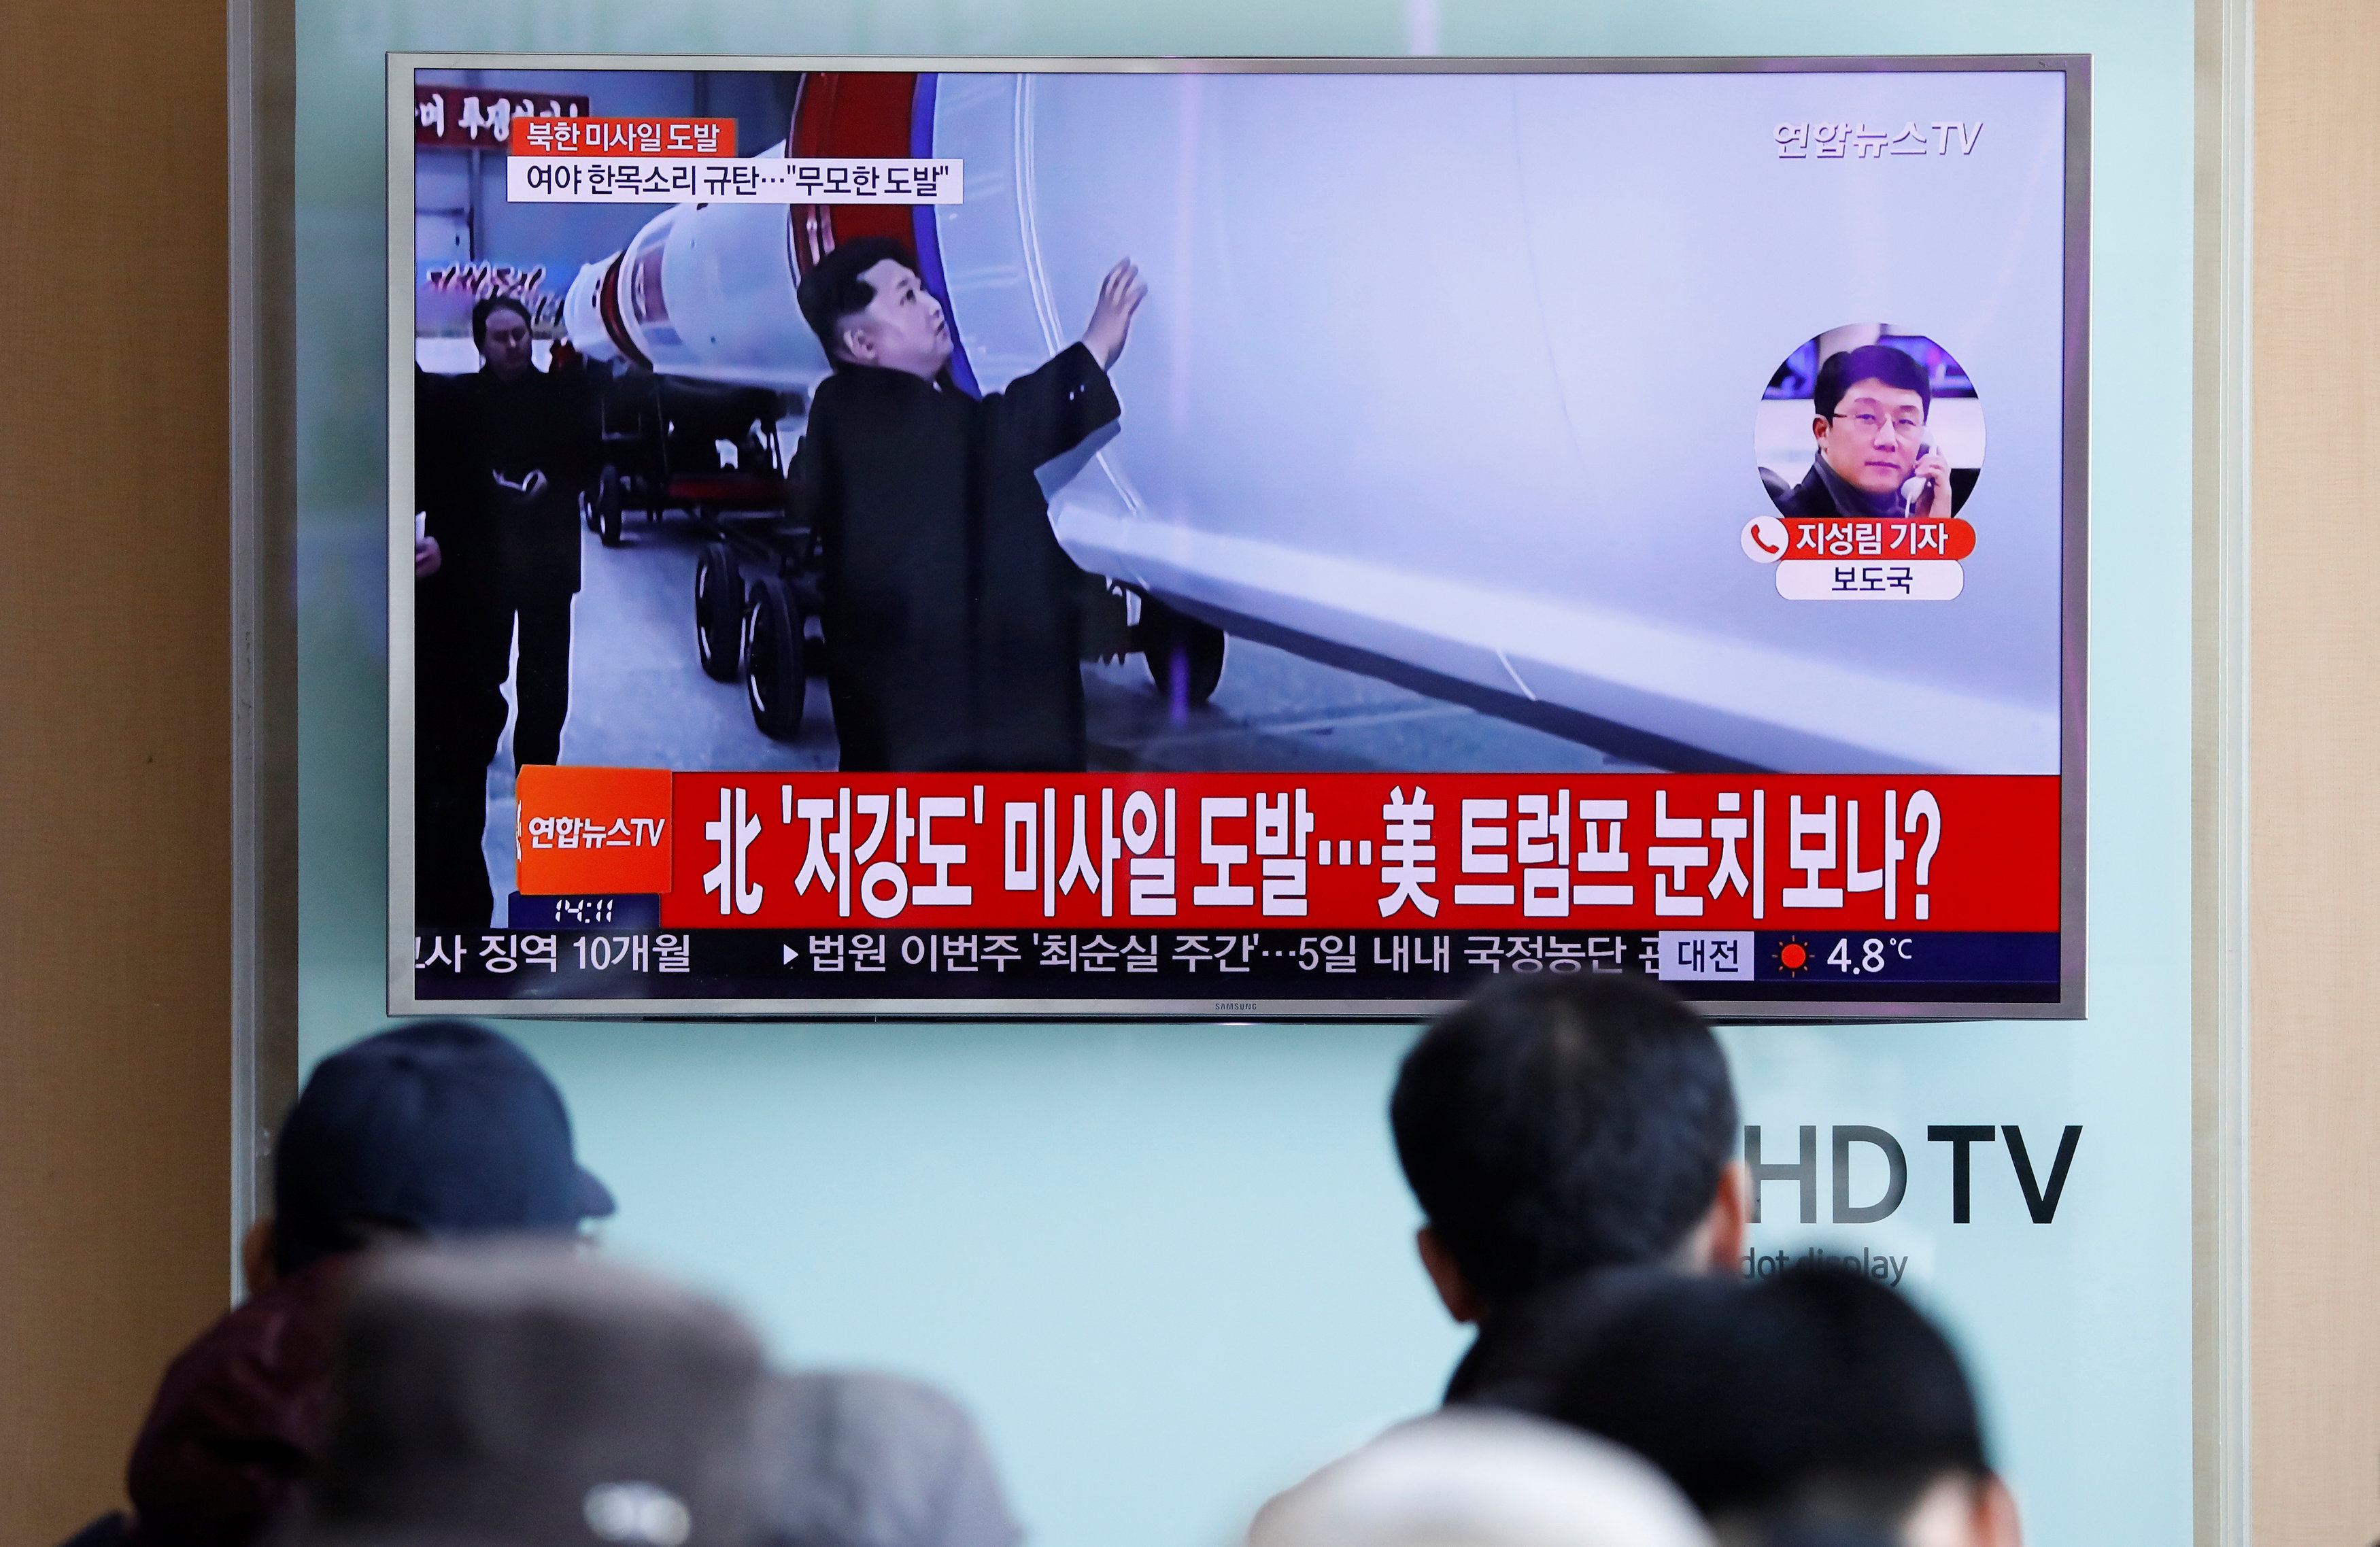 New nuclear-capable missile test a success, says North Korea